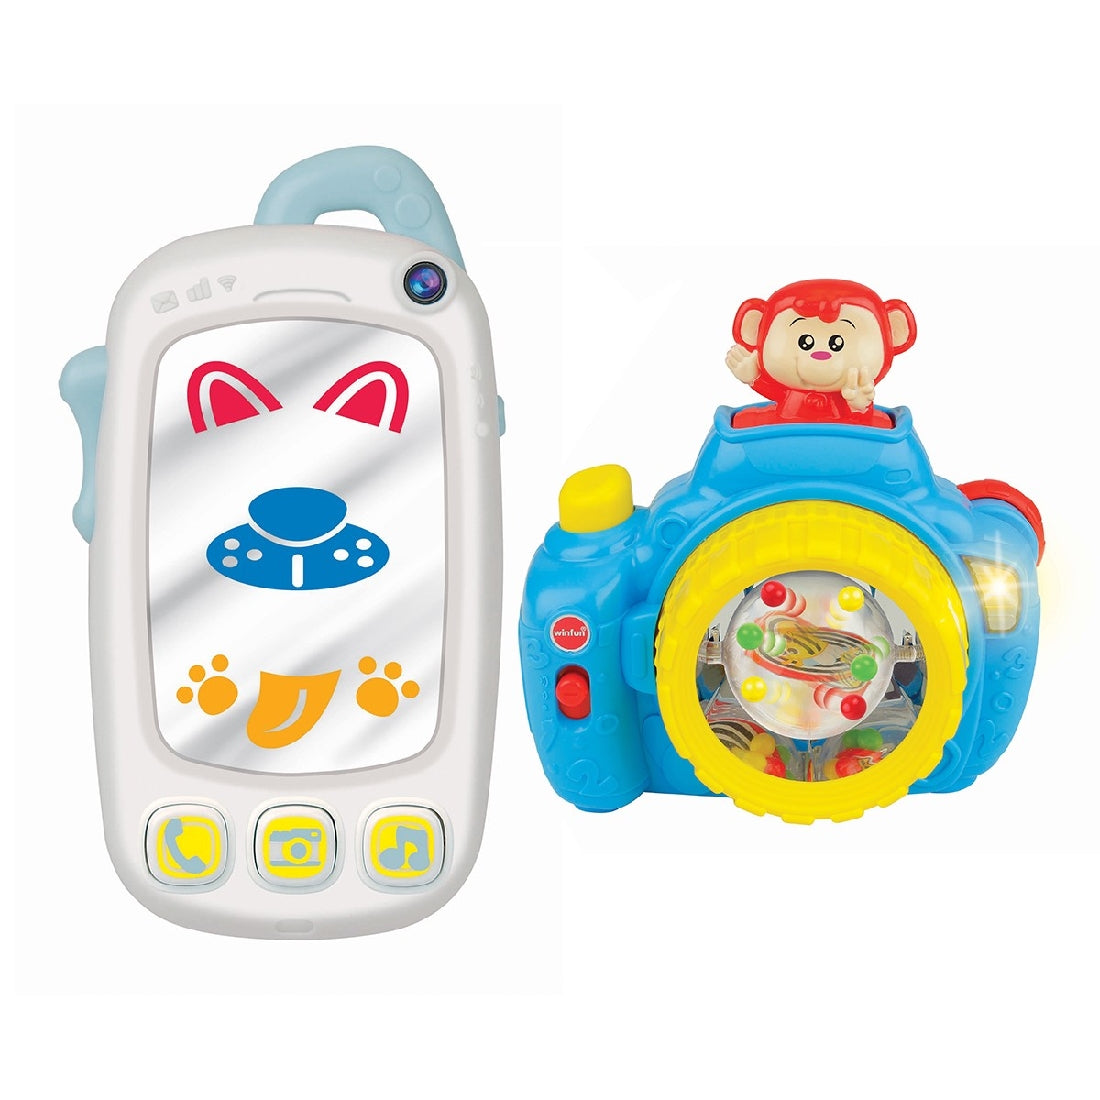 Winfun My First Baby Selfie Phone & Pop up Monkey Camera - Twin Pack